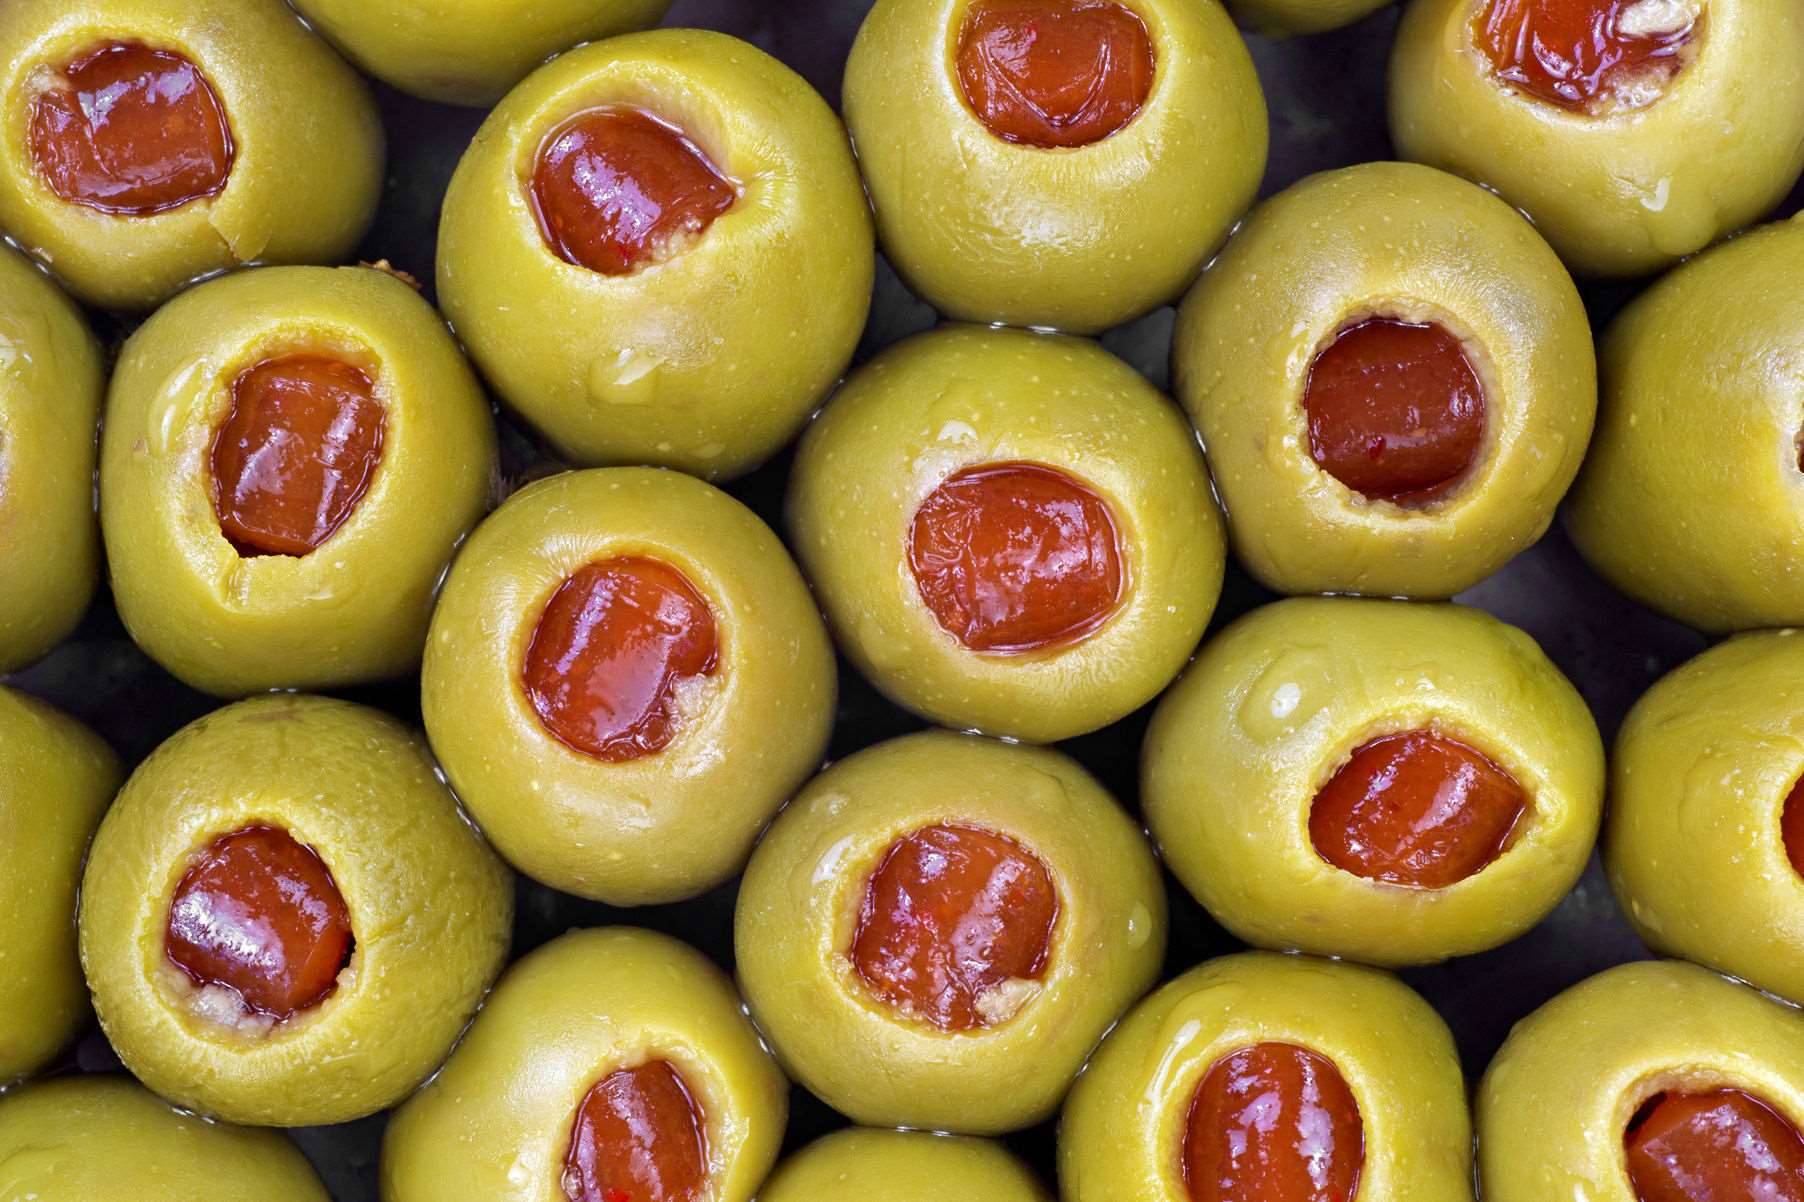 Unlike many foods, olives have never really gone out of fashion